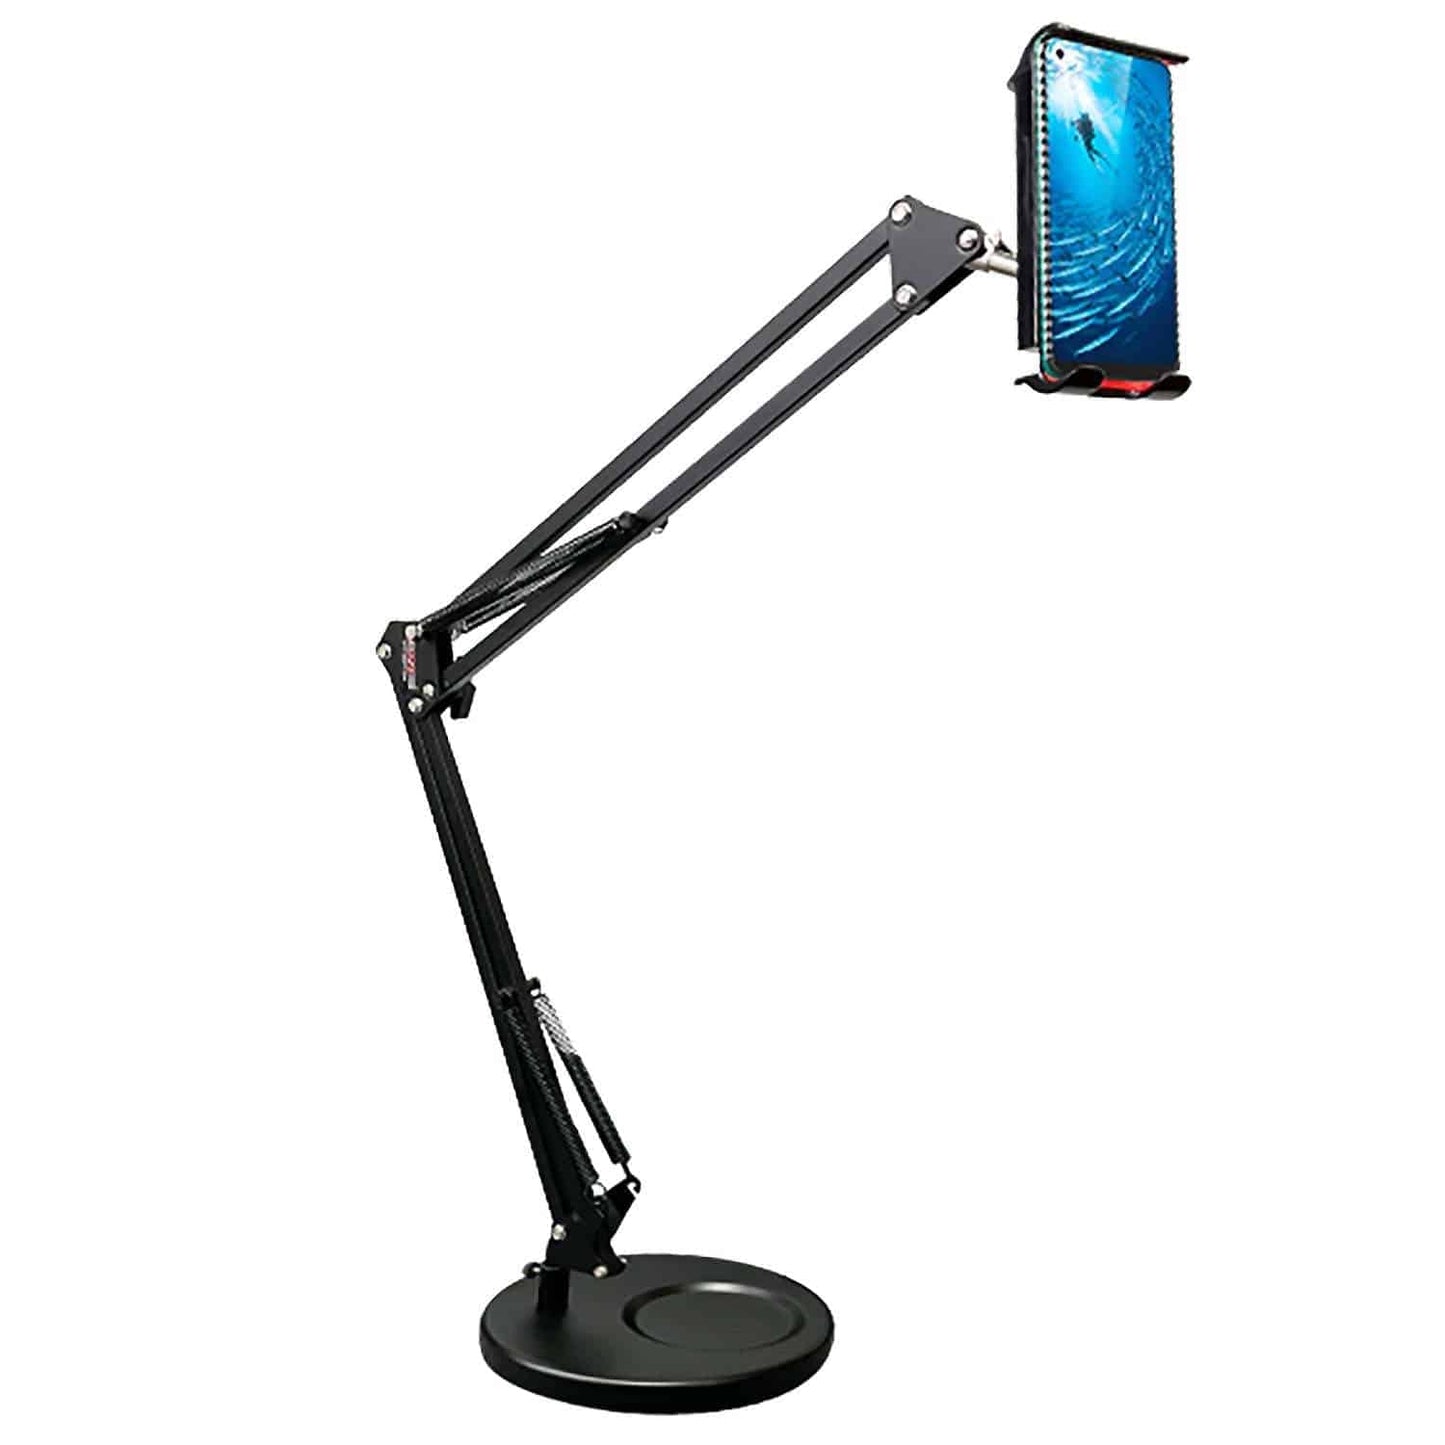 Phone Stand Mount for Desk ARM MOB